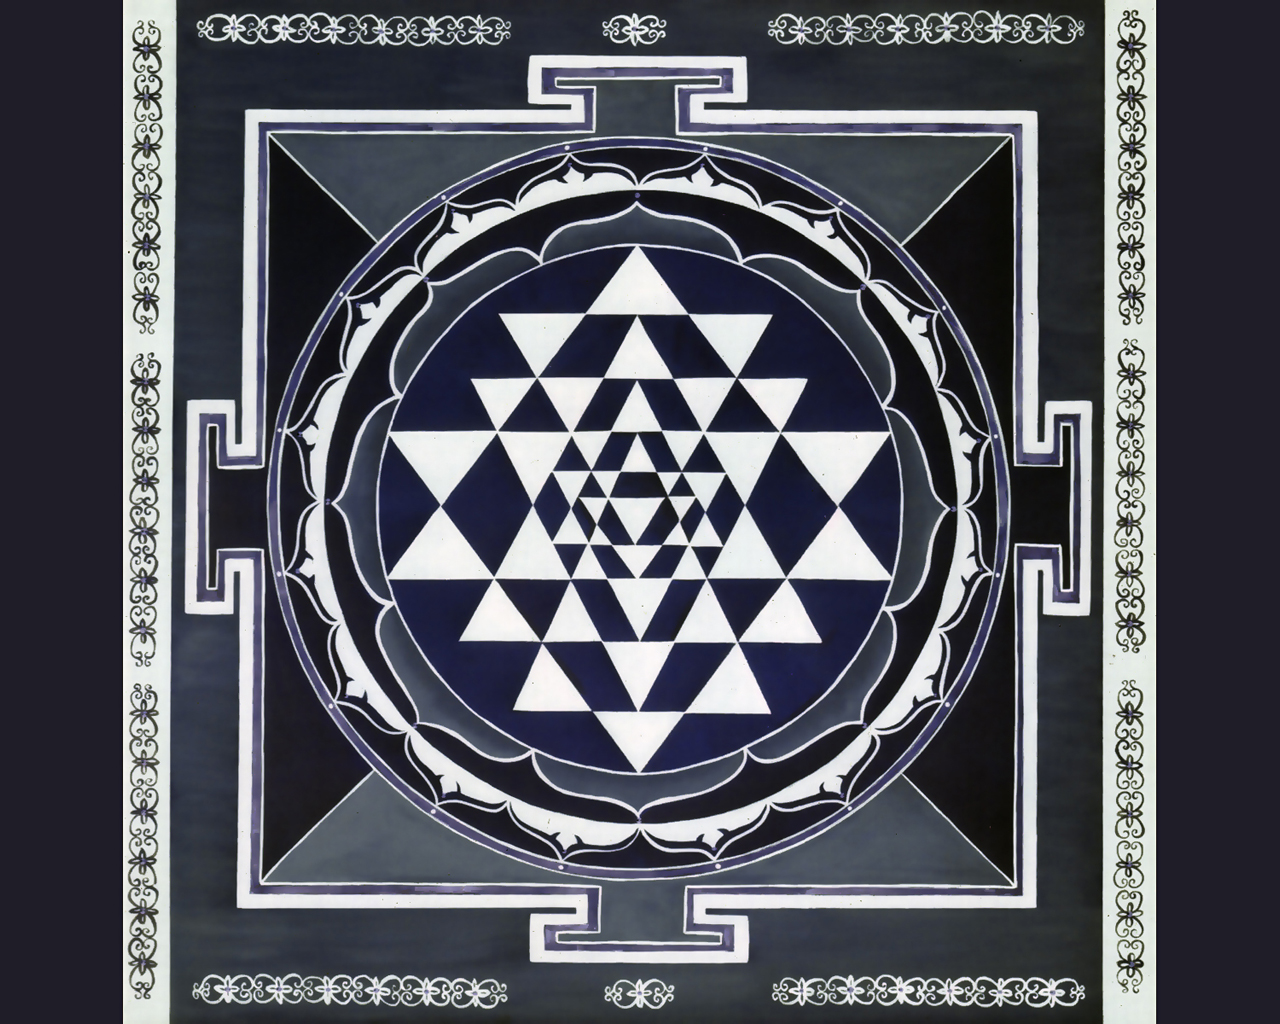 Sri Yantra Wallpapers The Revolution is Within